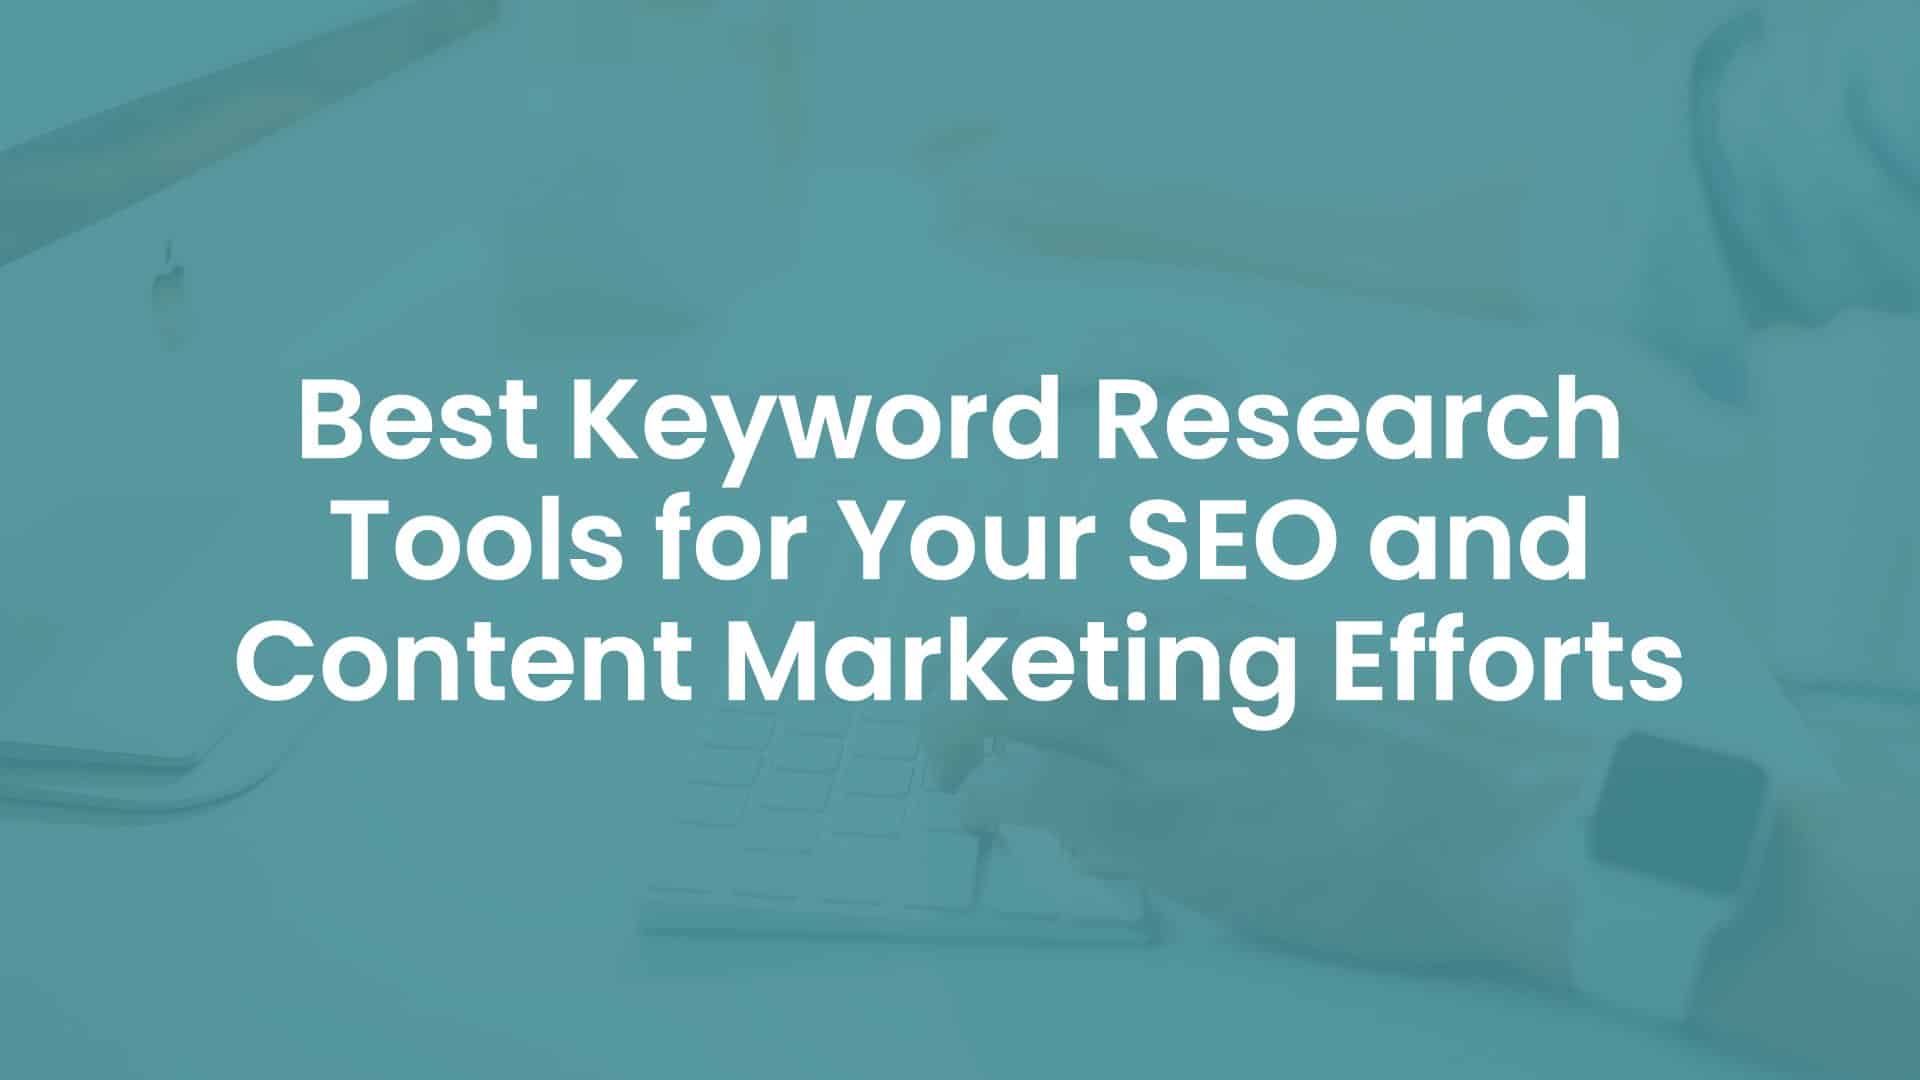 Best Keyword Research Tools for your SEO and Content Marketing Efforts cover